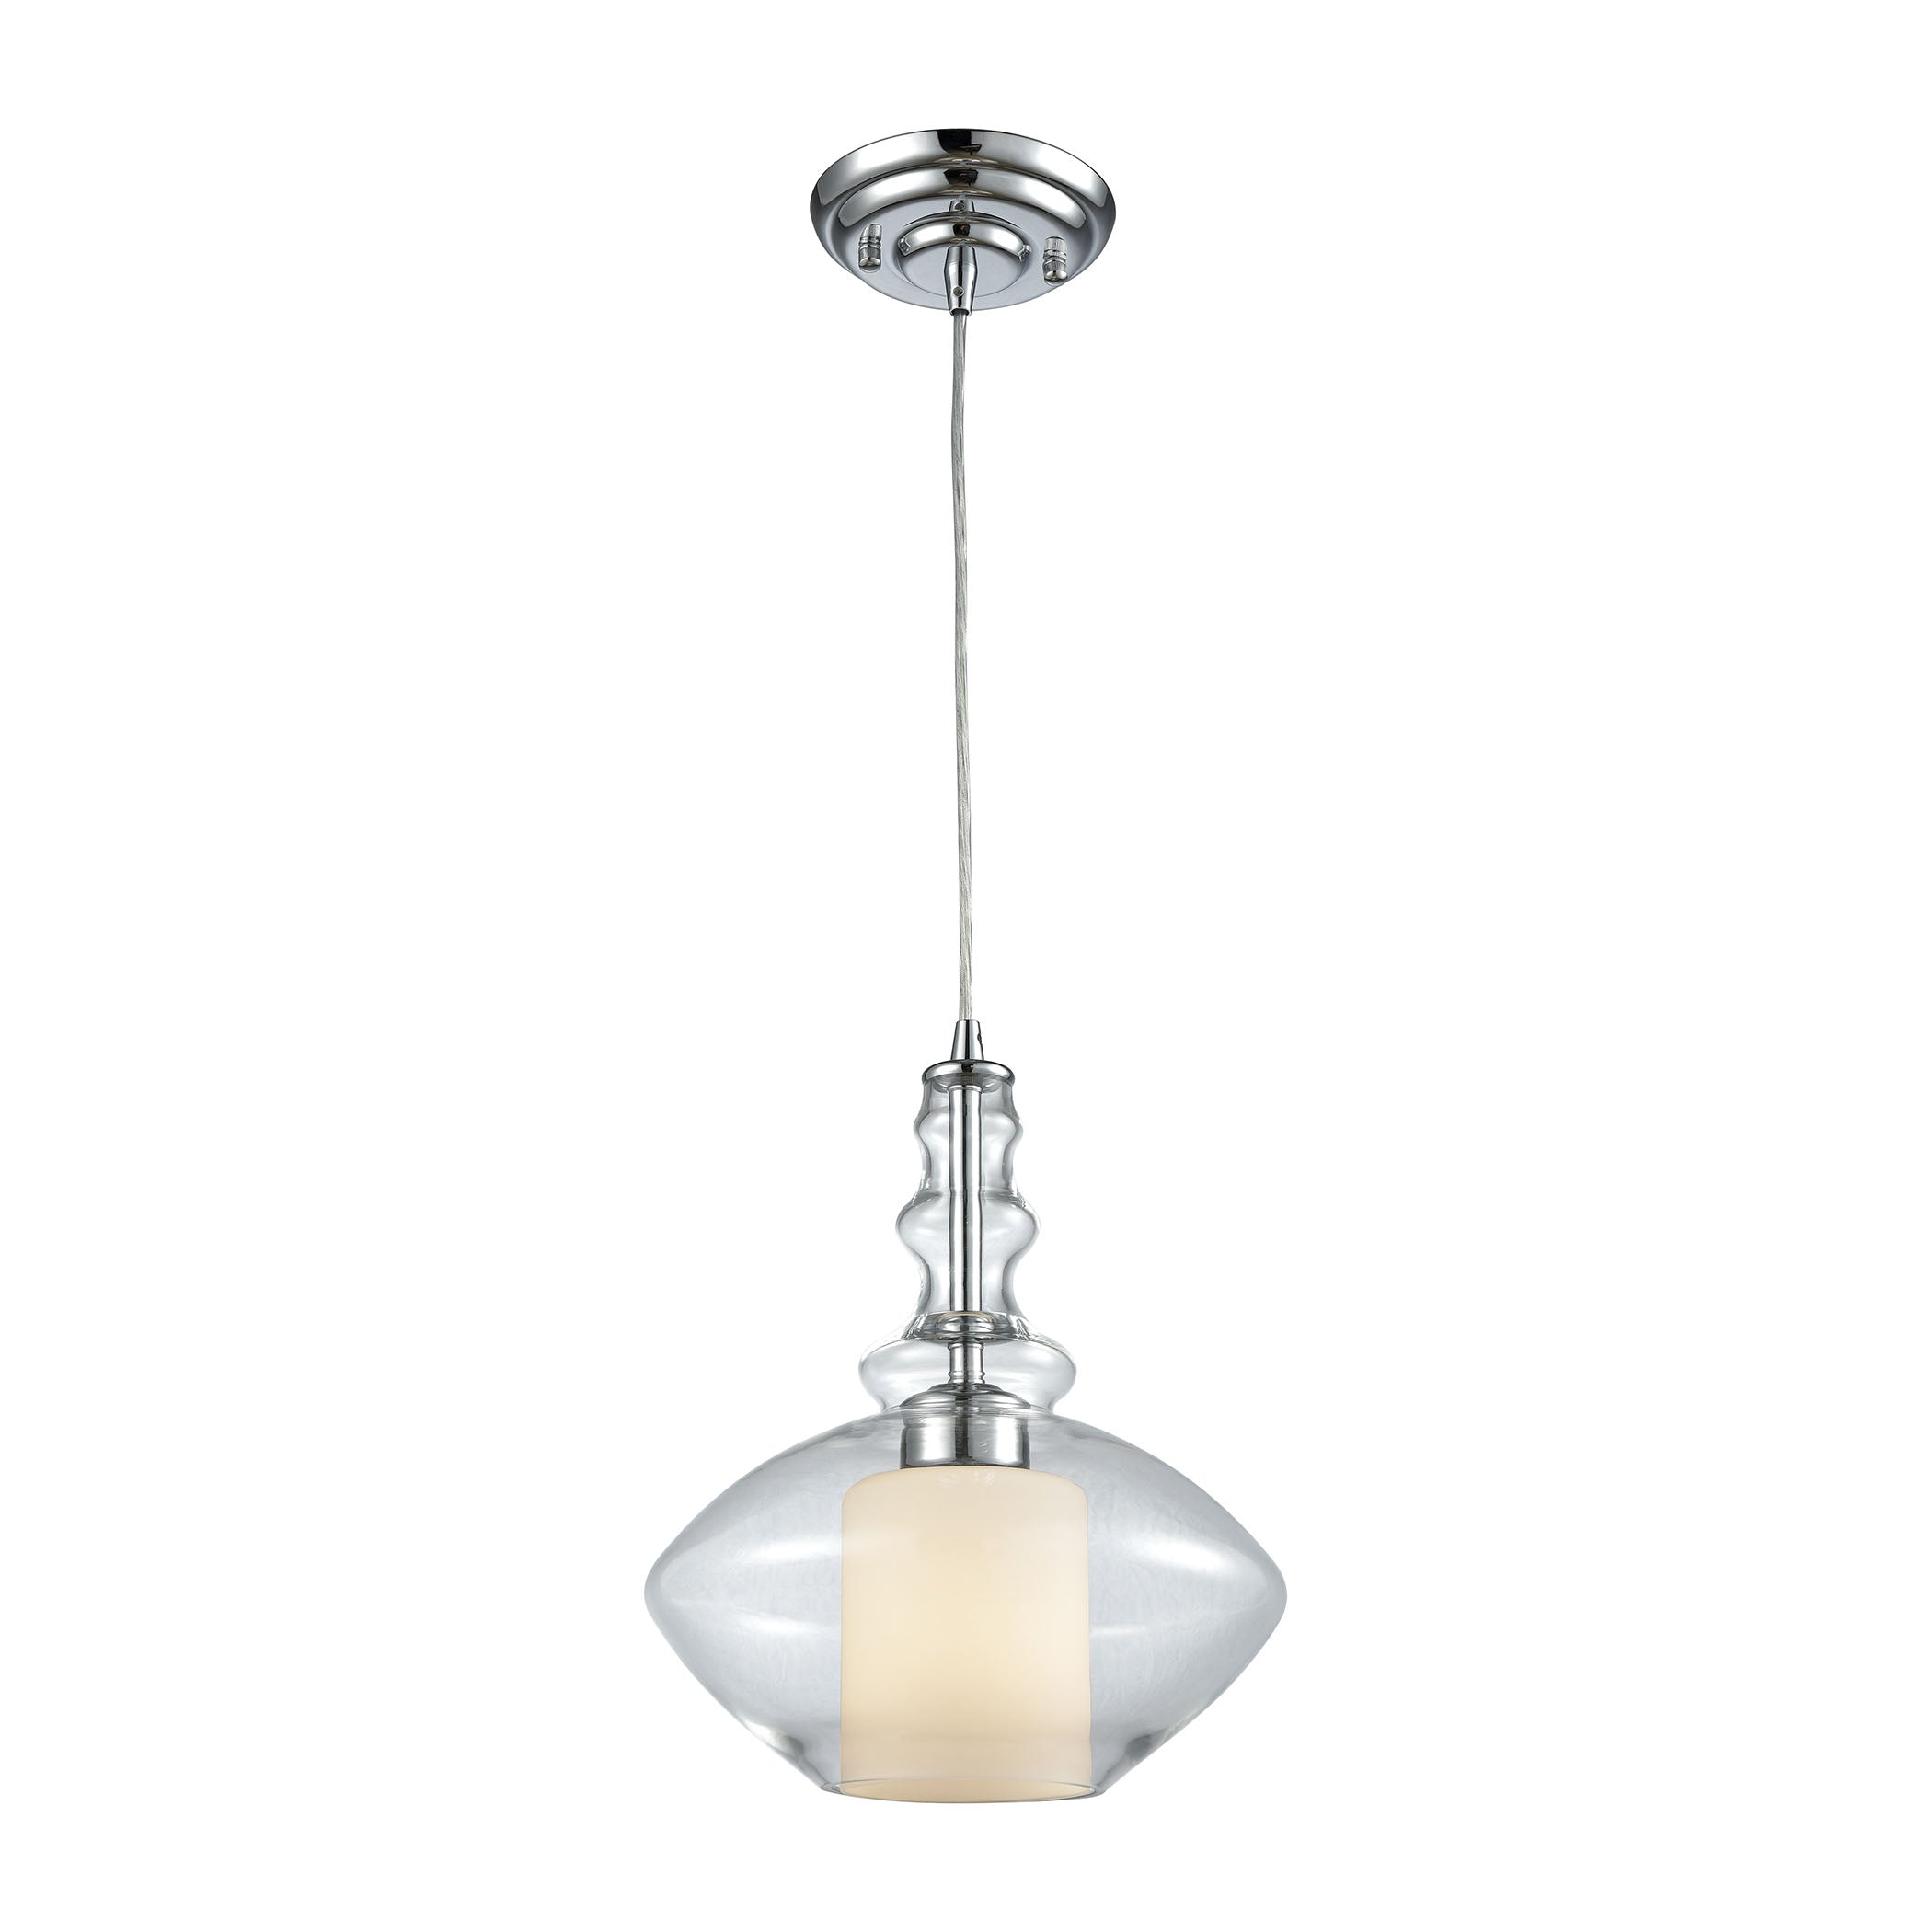 ELK Lighting 56500/1-LA Alora 1-Light Mini Pendant in Chrome with Clear and Opal White Glass - Includes Adapter Kit